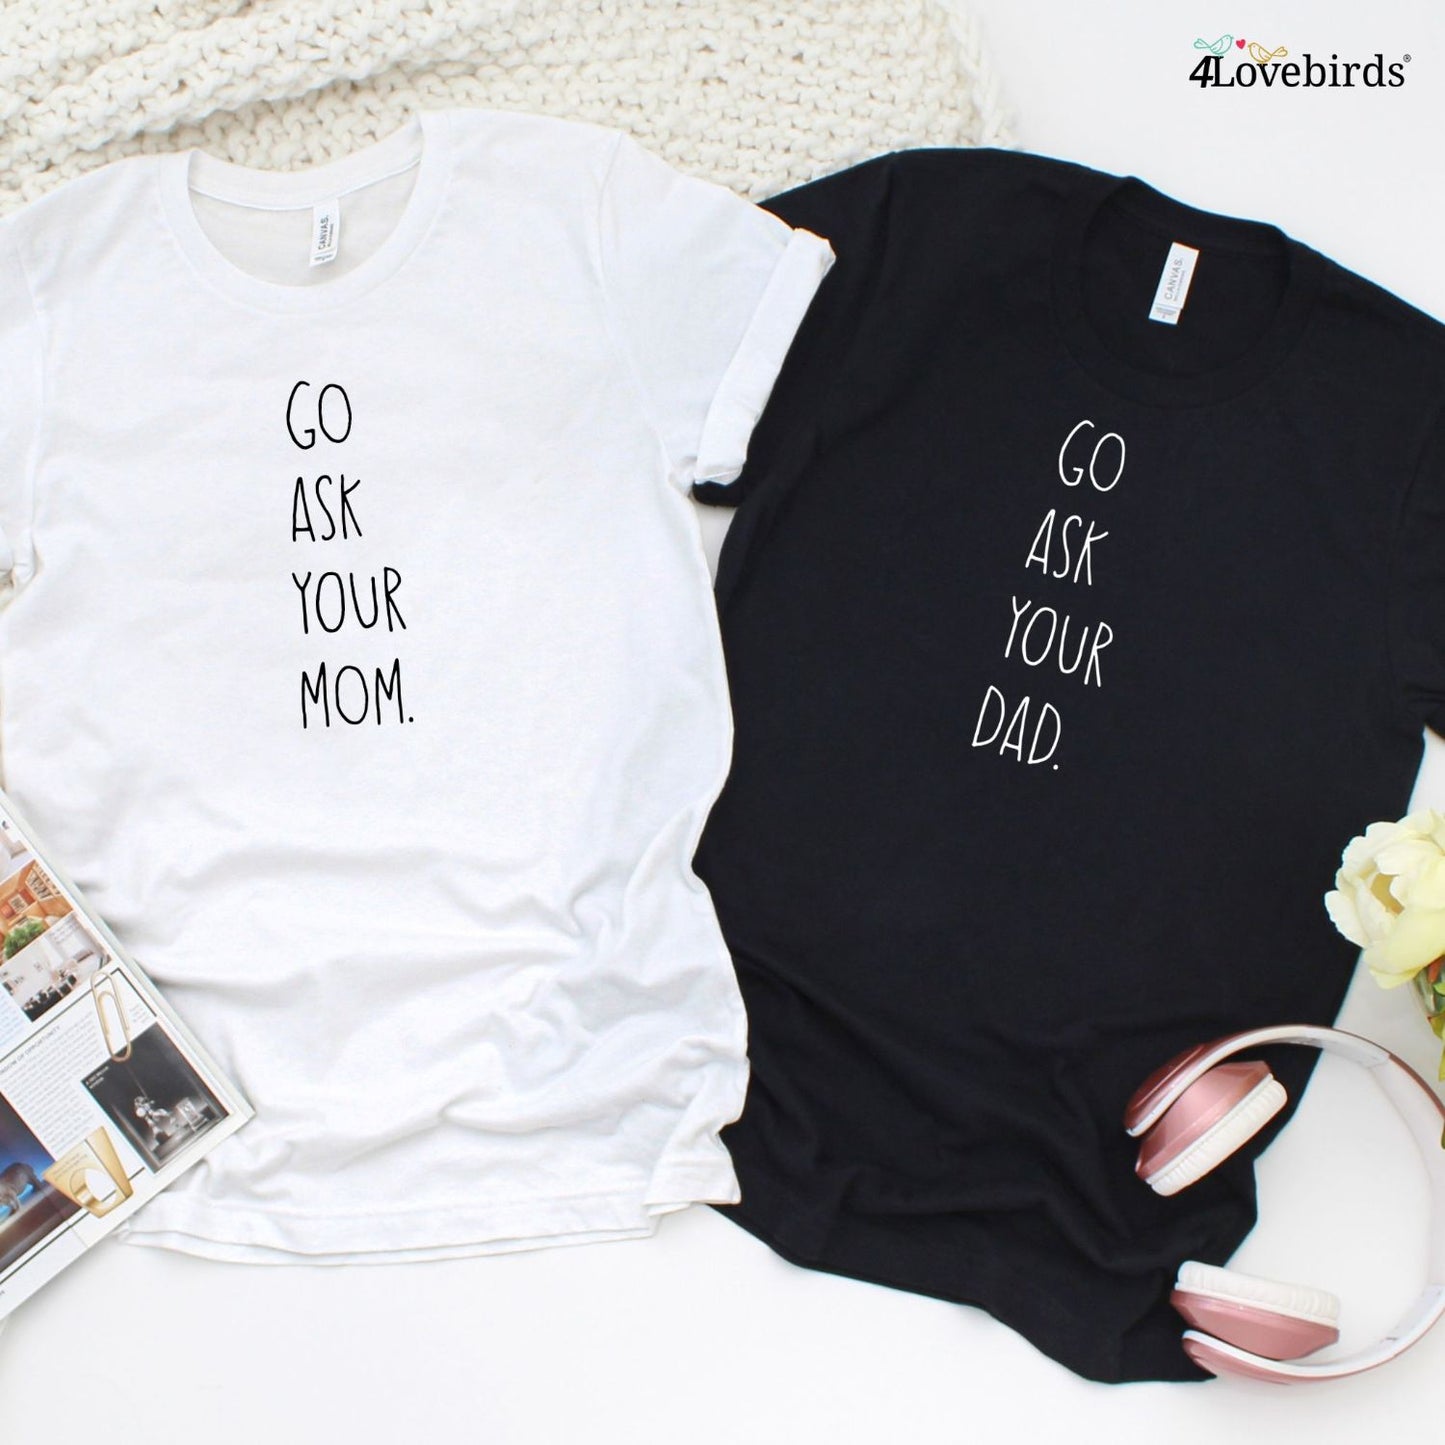 Go Ask Your Dad/Mom Comical Matching Outfits - Ideal Mothers Day & Birthday Gift Set